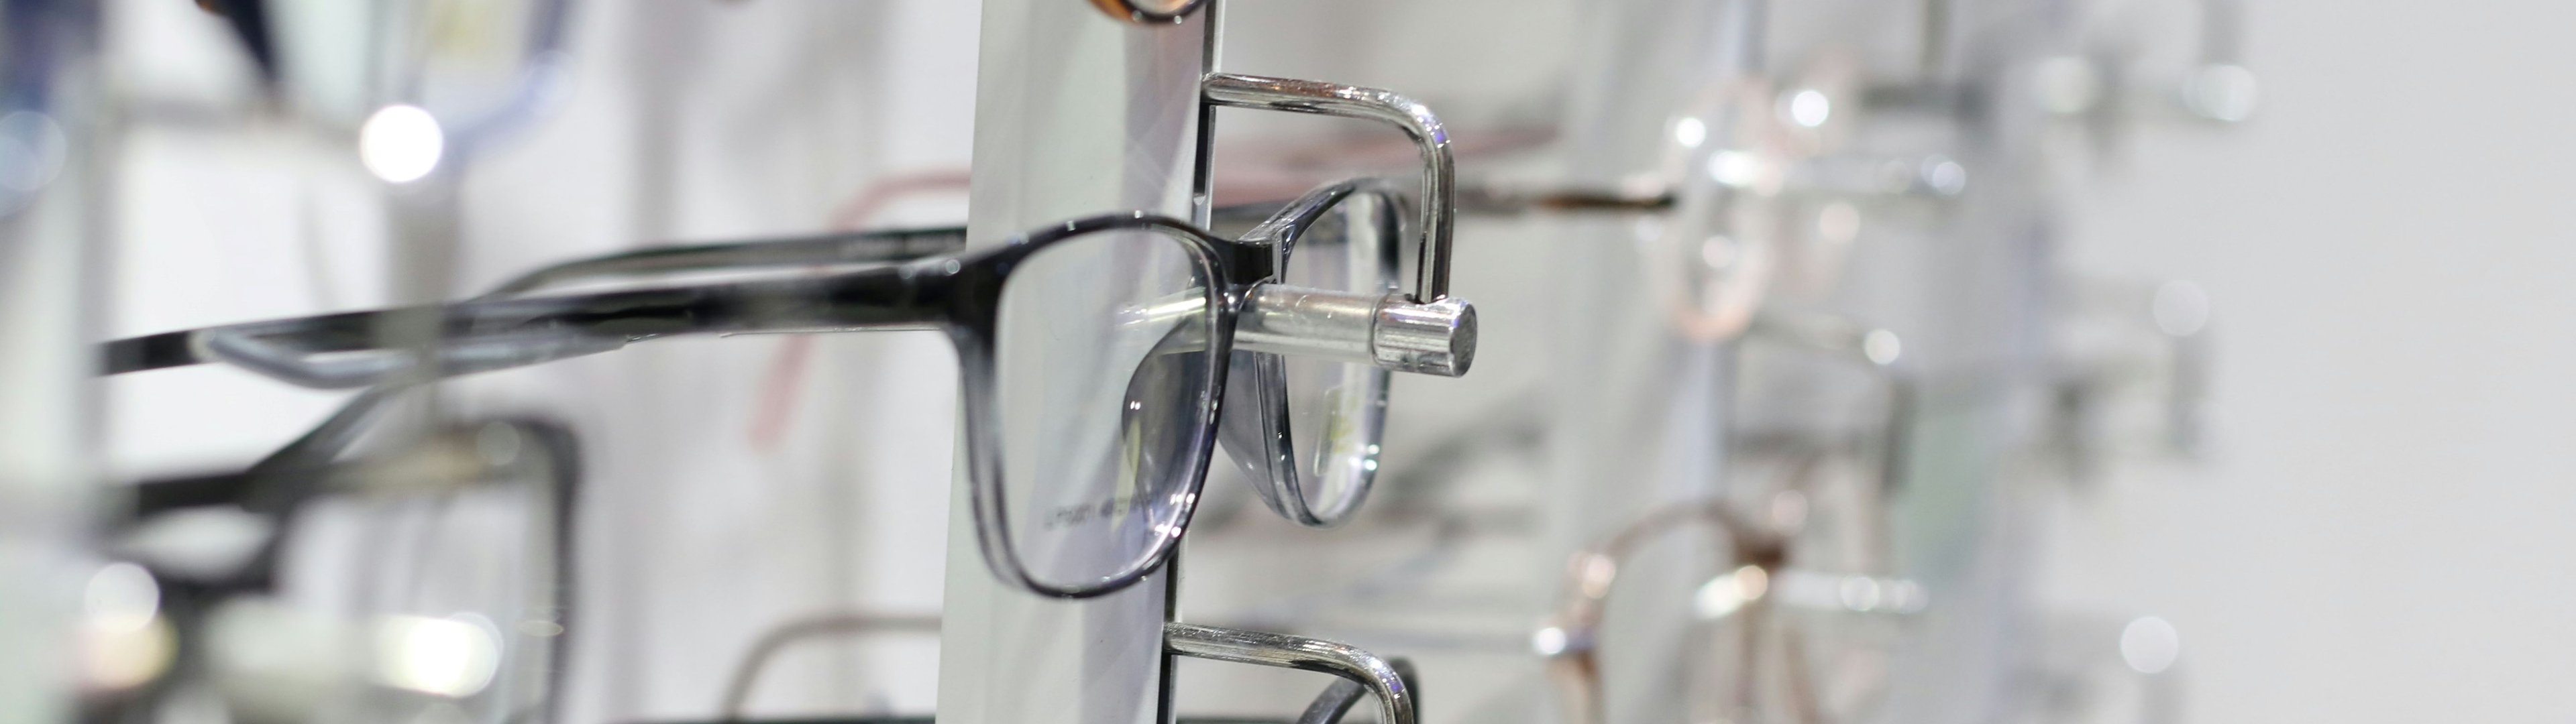 You may well also provide these valuable Optometry services…..which we have optimised as well